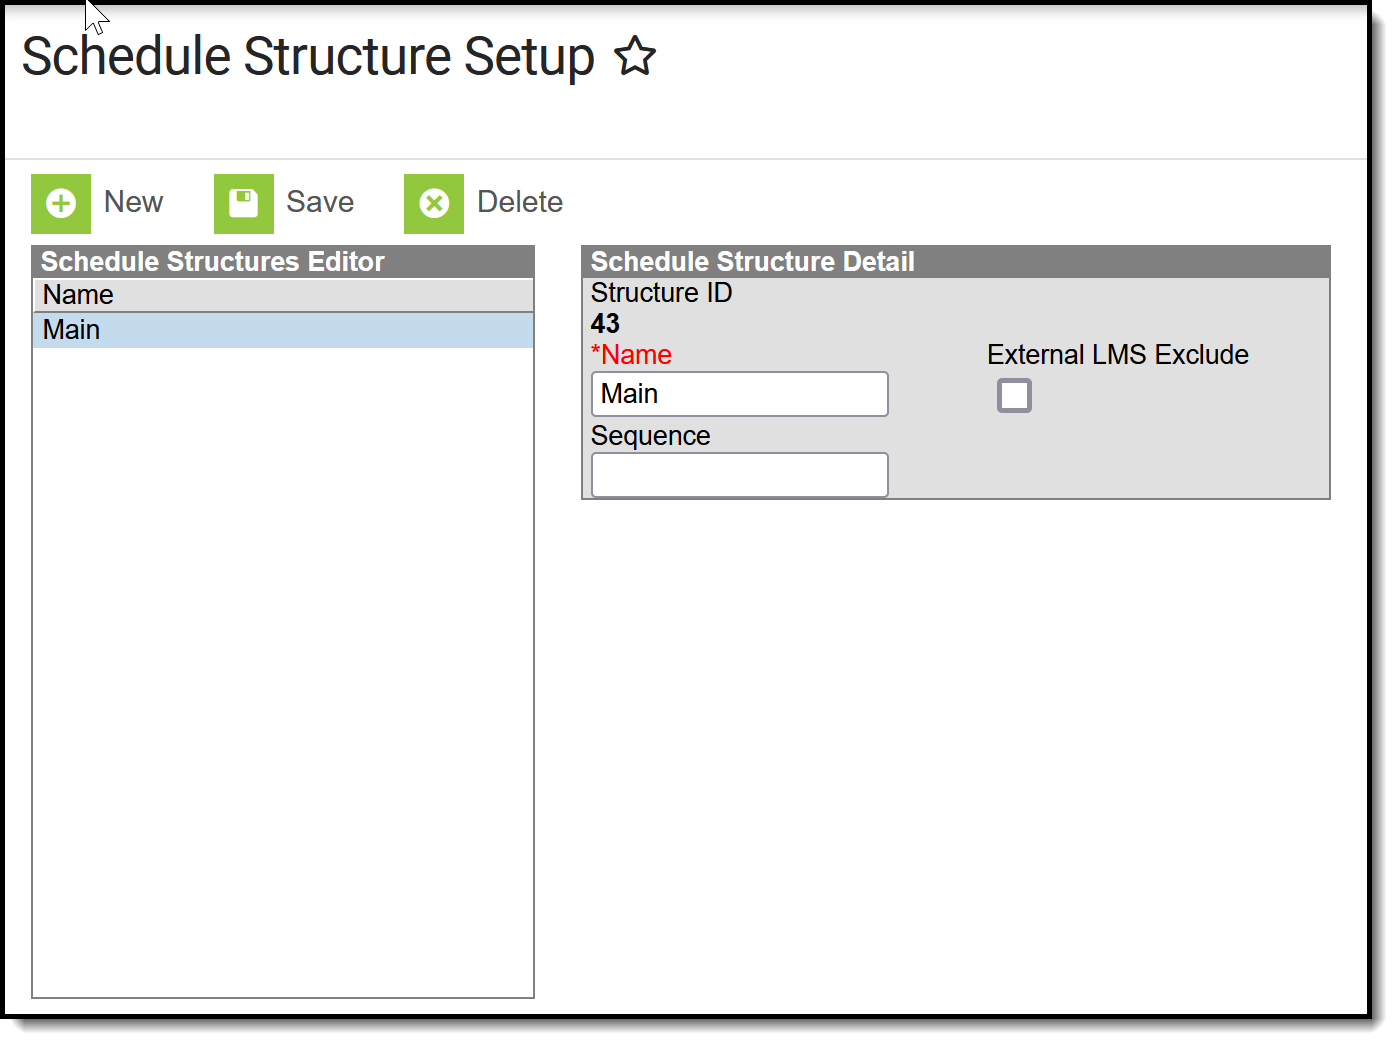 Image of the Schedule Structure Detail editor.